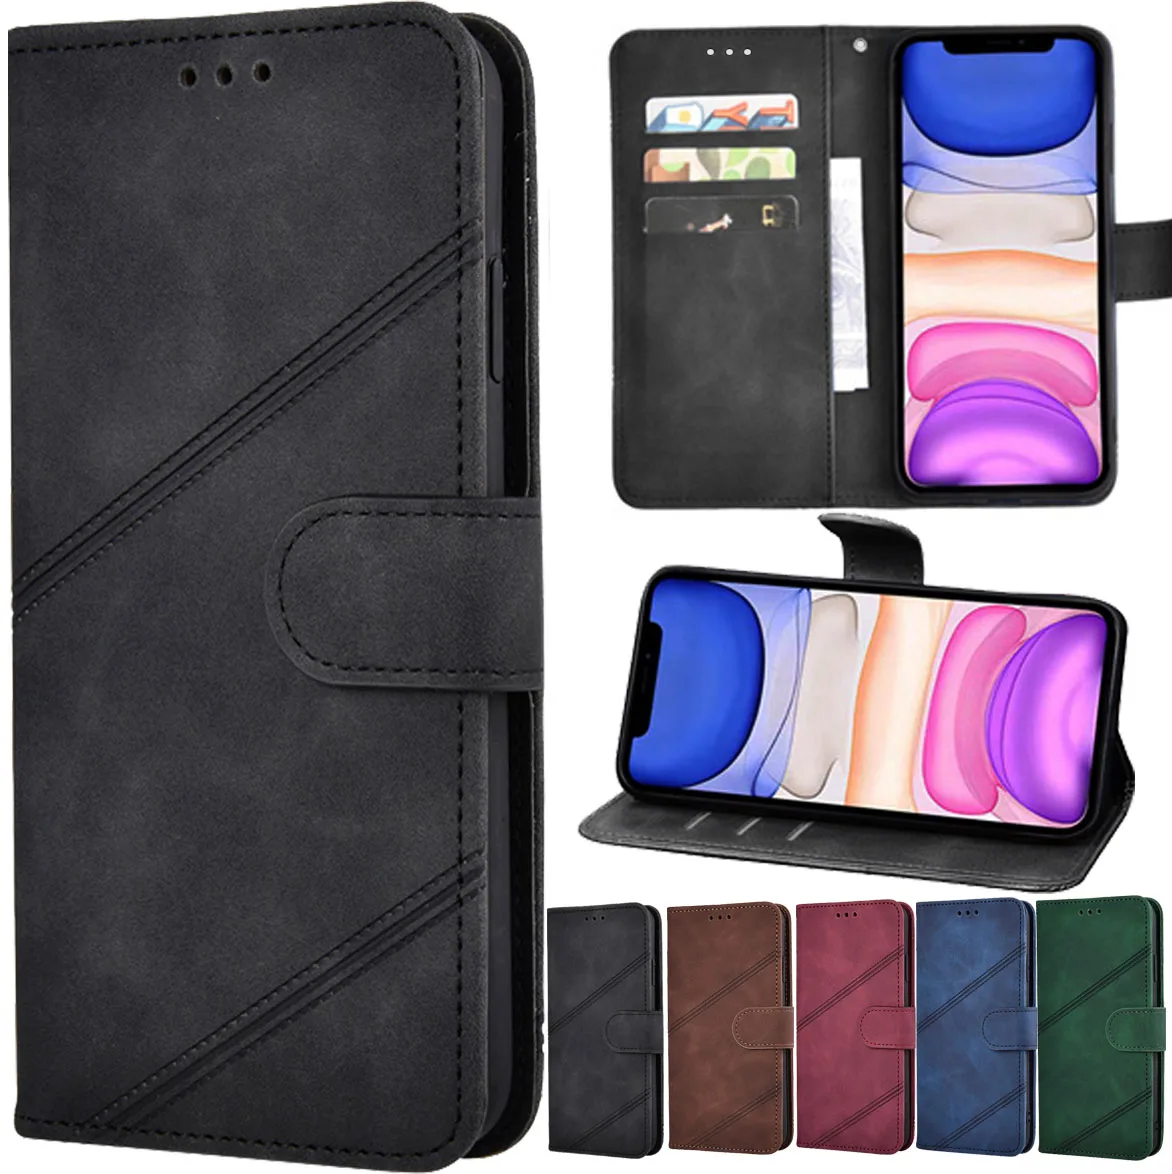 

Flip Leather Case For Samsung Galaxy A51 A60 A70 A71 A80 M10S M20 M30 M40 XCover 5 4 A7 A9 2018 Note 10 Plus Wallet Fundas Cover